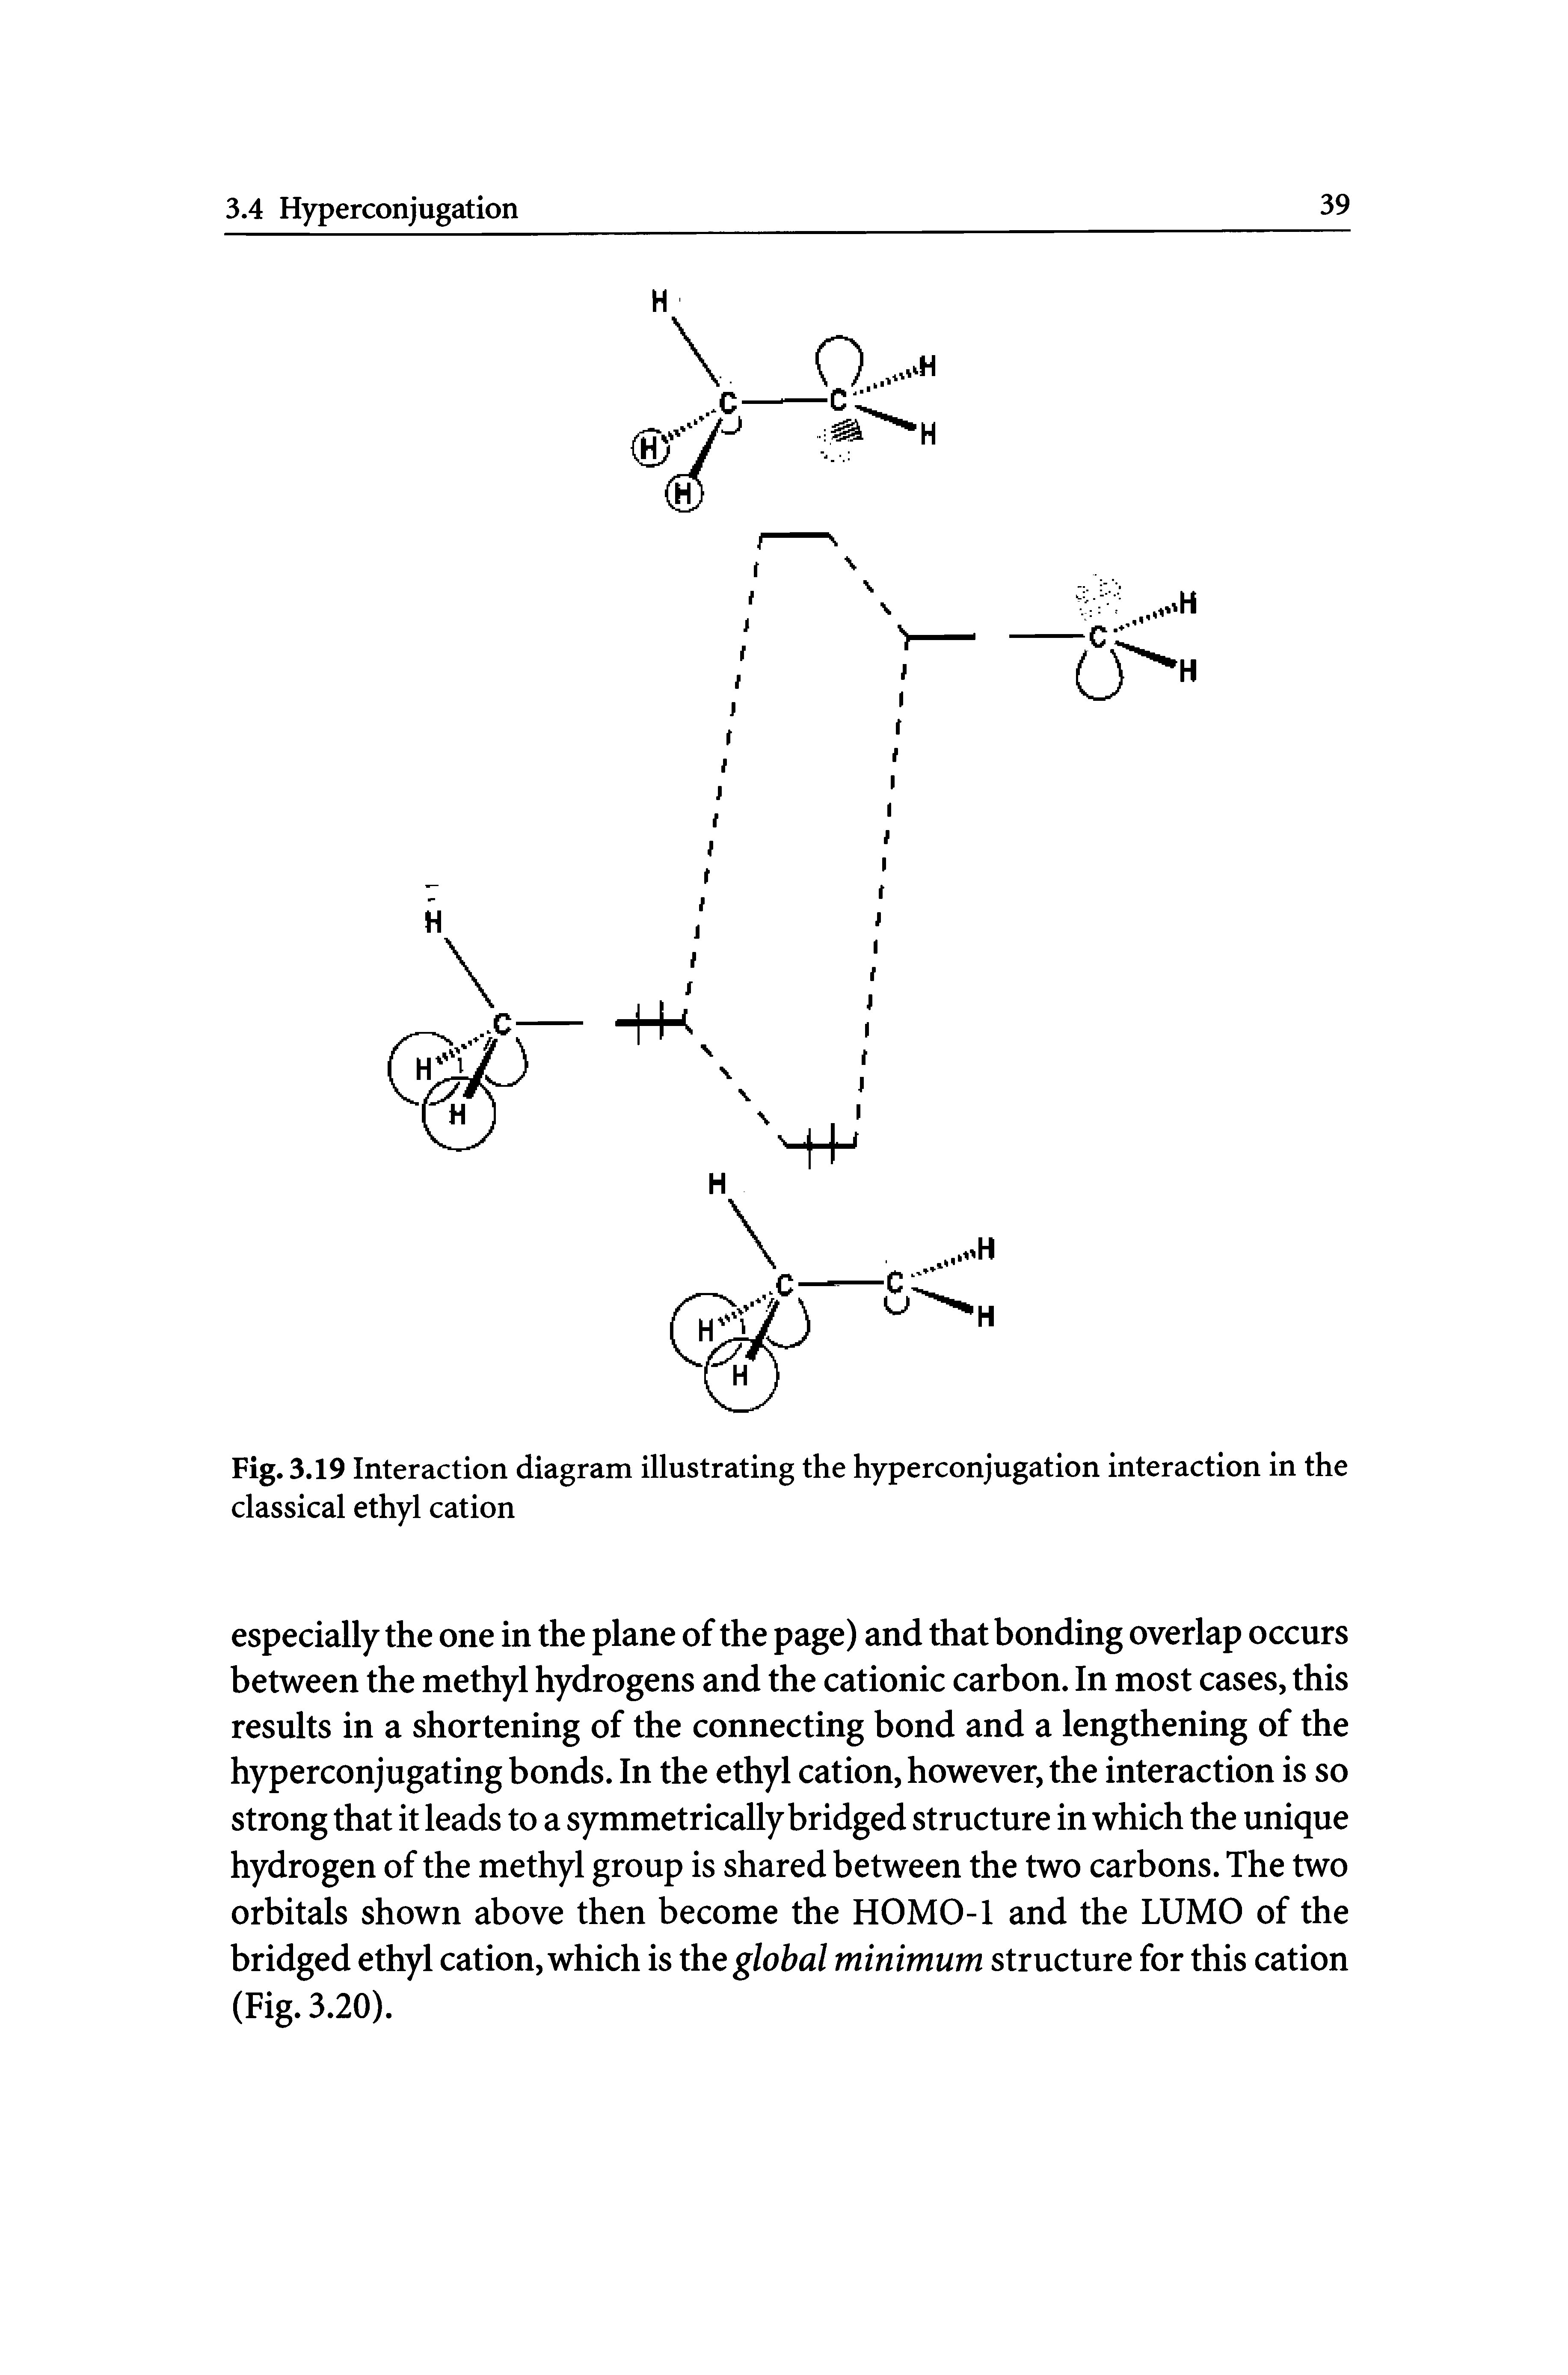 Fig. 3.19 Interaction diagram illustrating the hyperconjugation interaction in the classical ethyl cation...